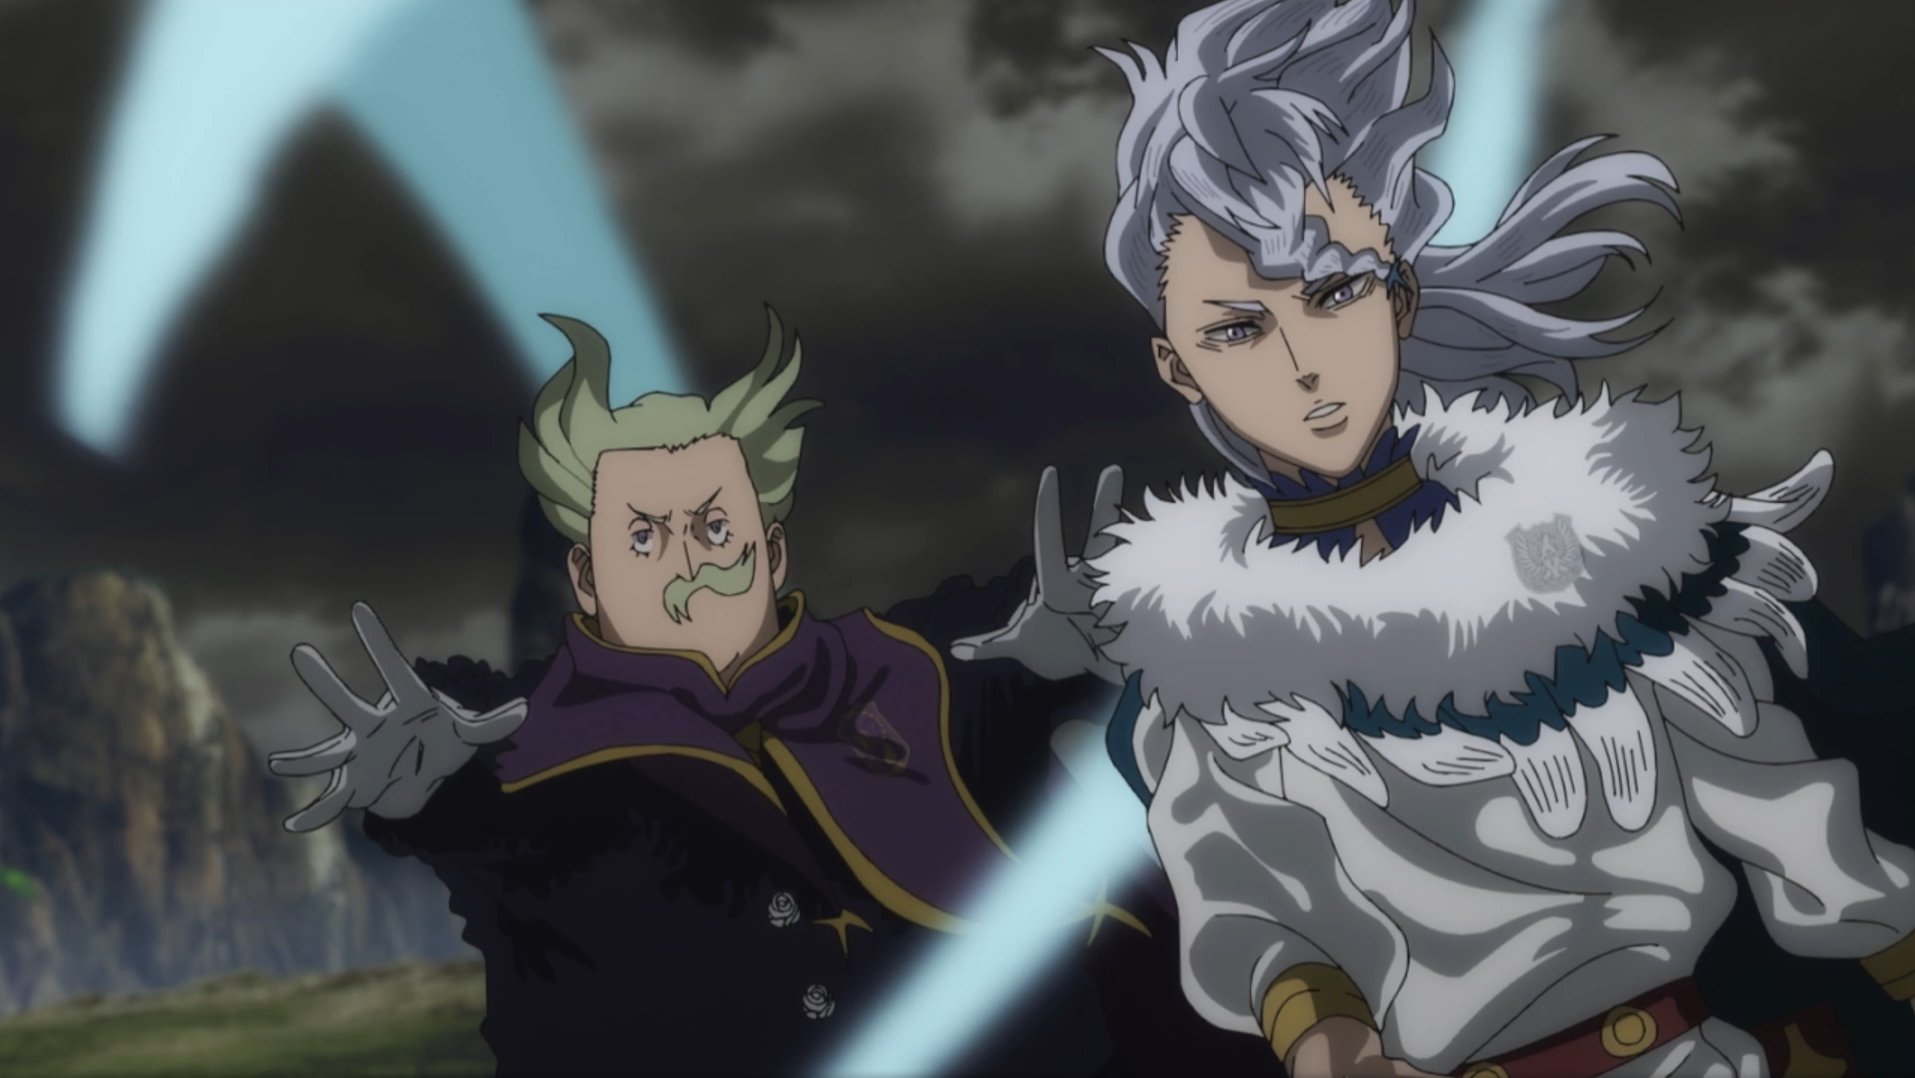 Black Clover Perfect Shots on Twitter.